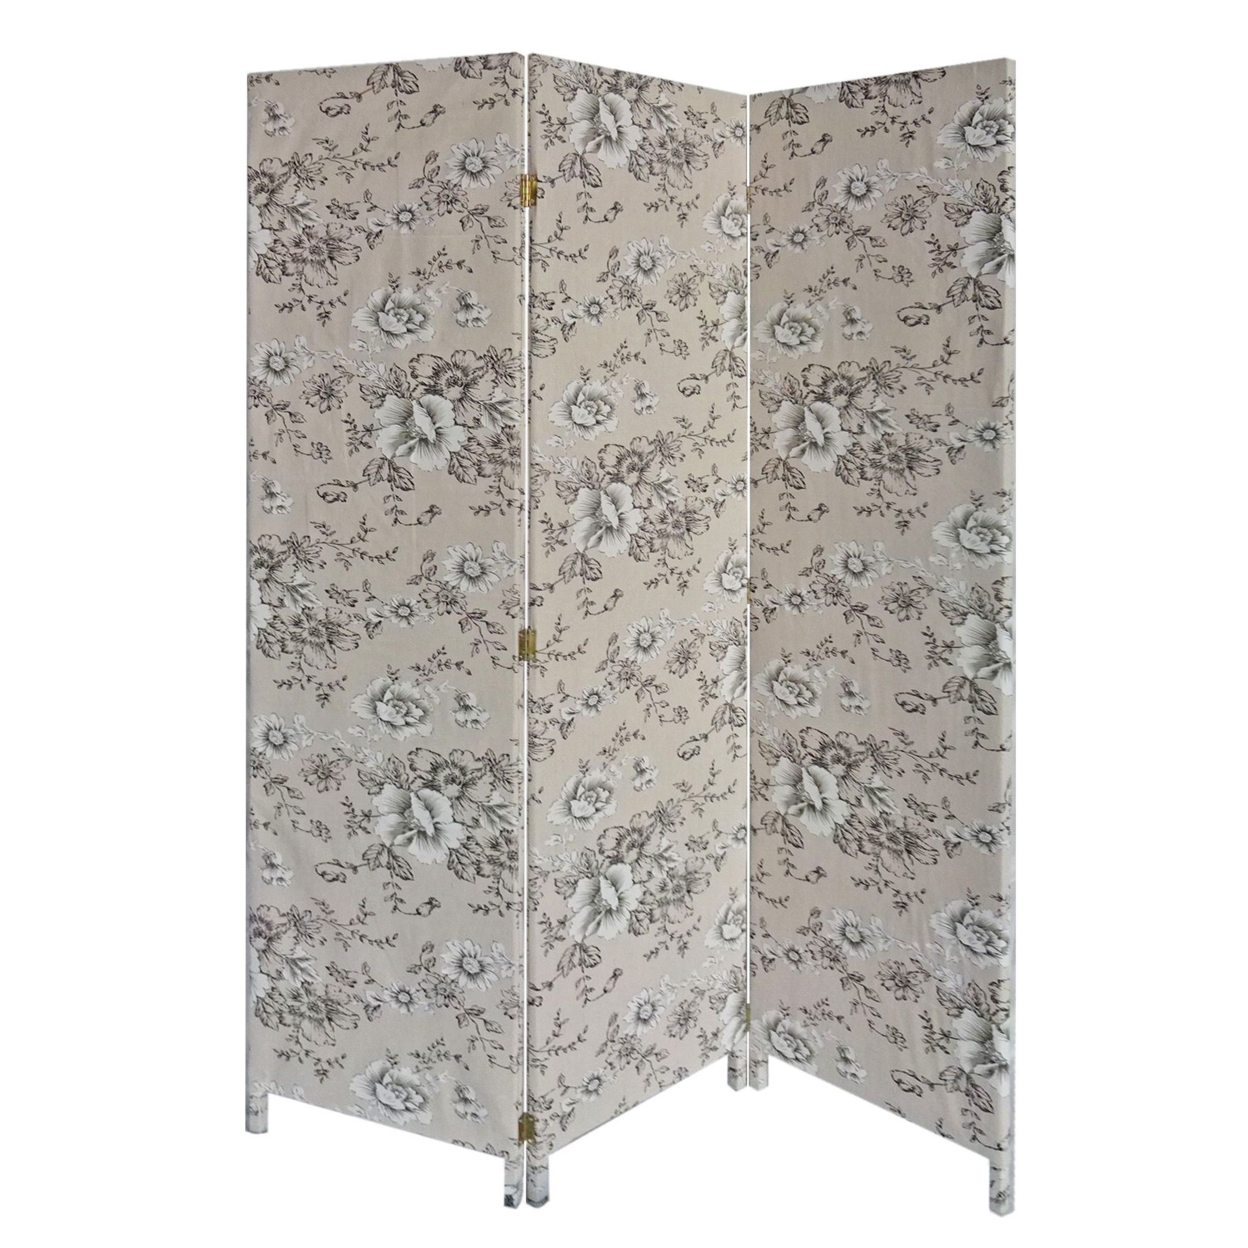 71 Inch 3 Panel Fabric Room Divider With Floral Print, Gray- Saltoro Sherpi